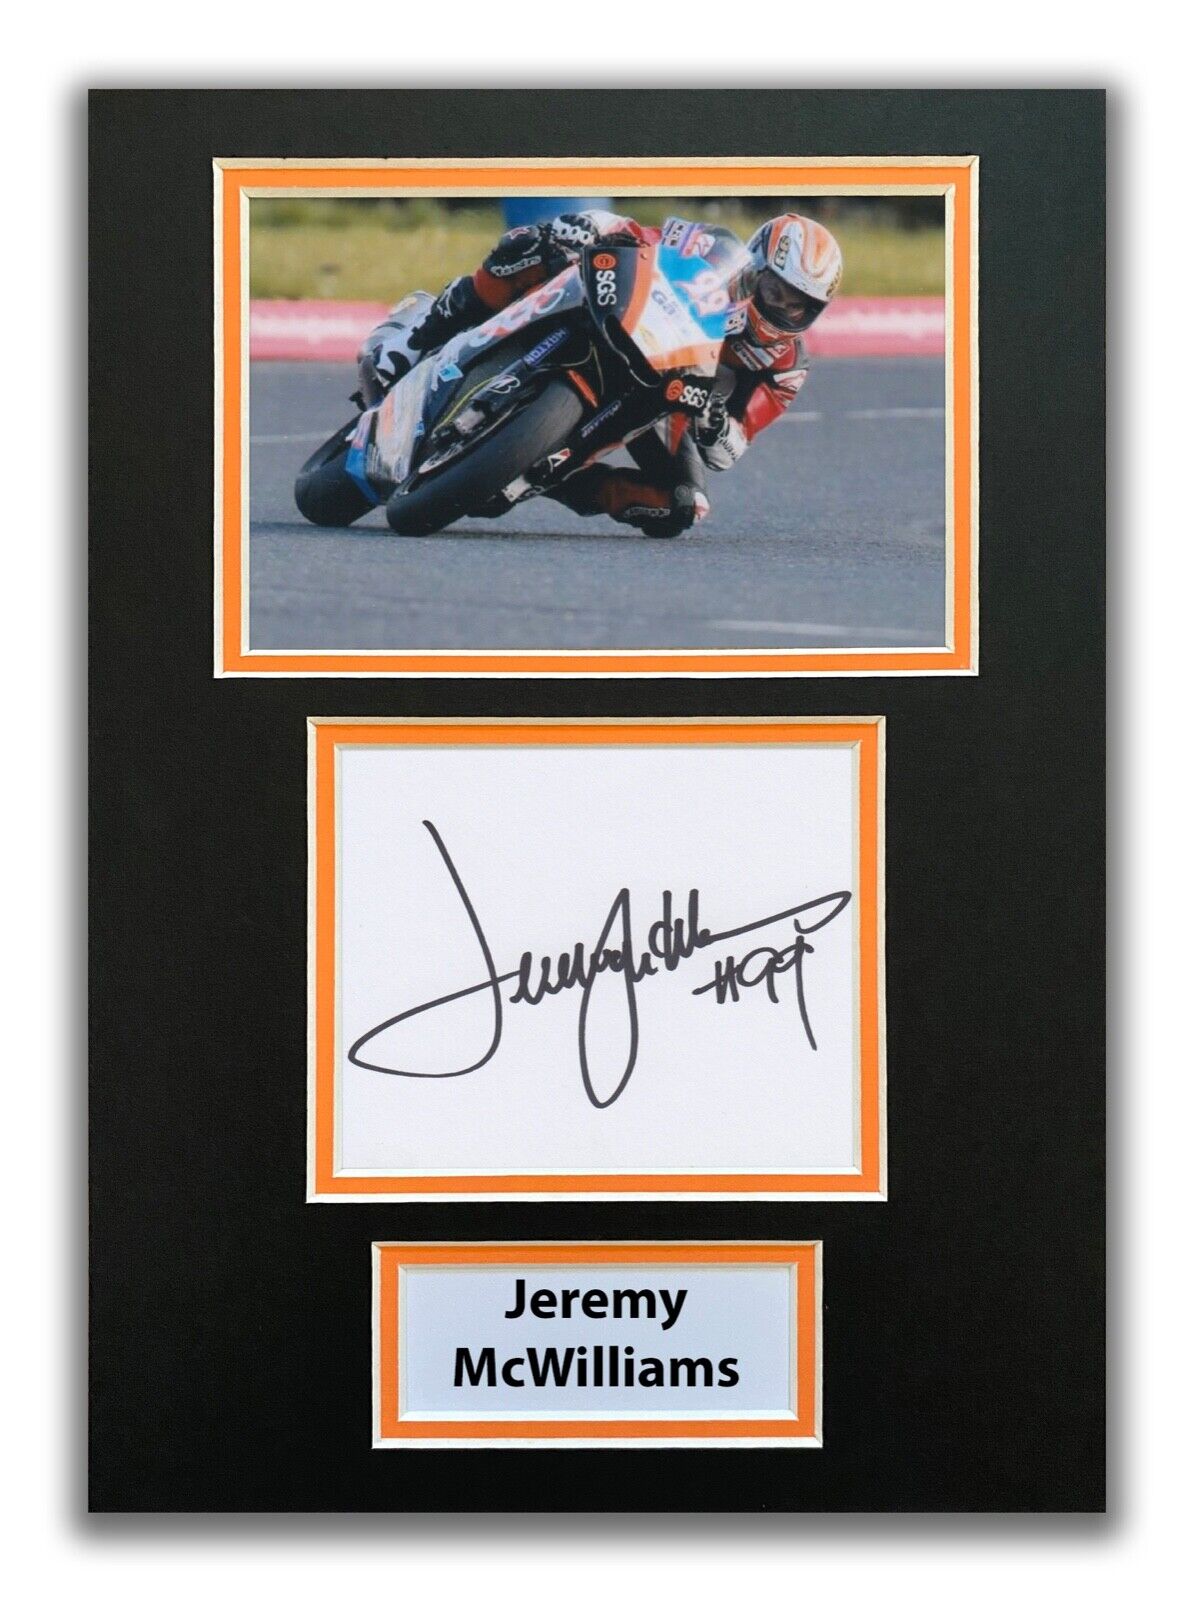 JEREMY MCWILLIAMS HAND SIGNED A4 MOUNTED Photo Poster painting DISPLAY - NORTH WEST 200 1.